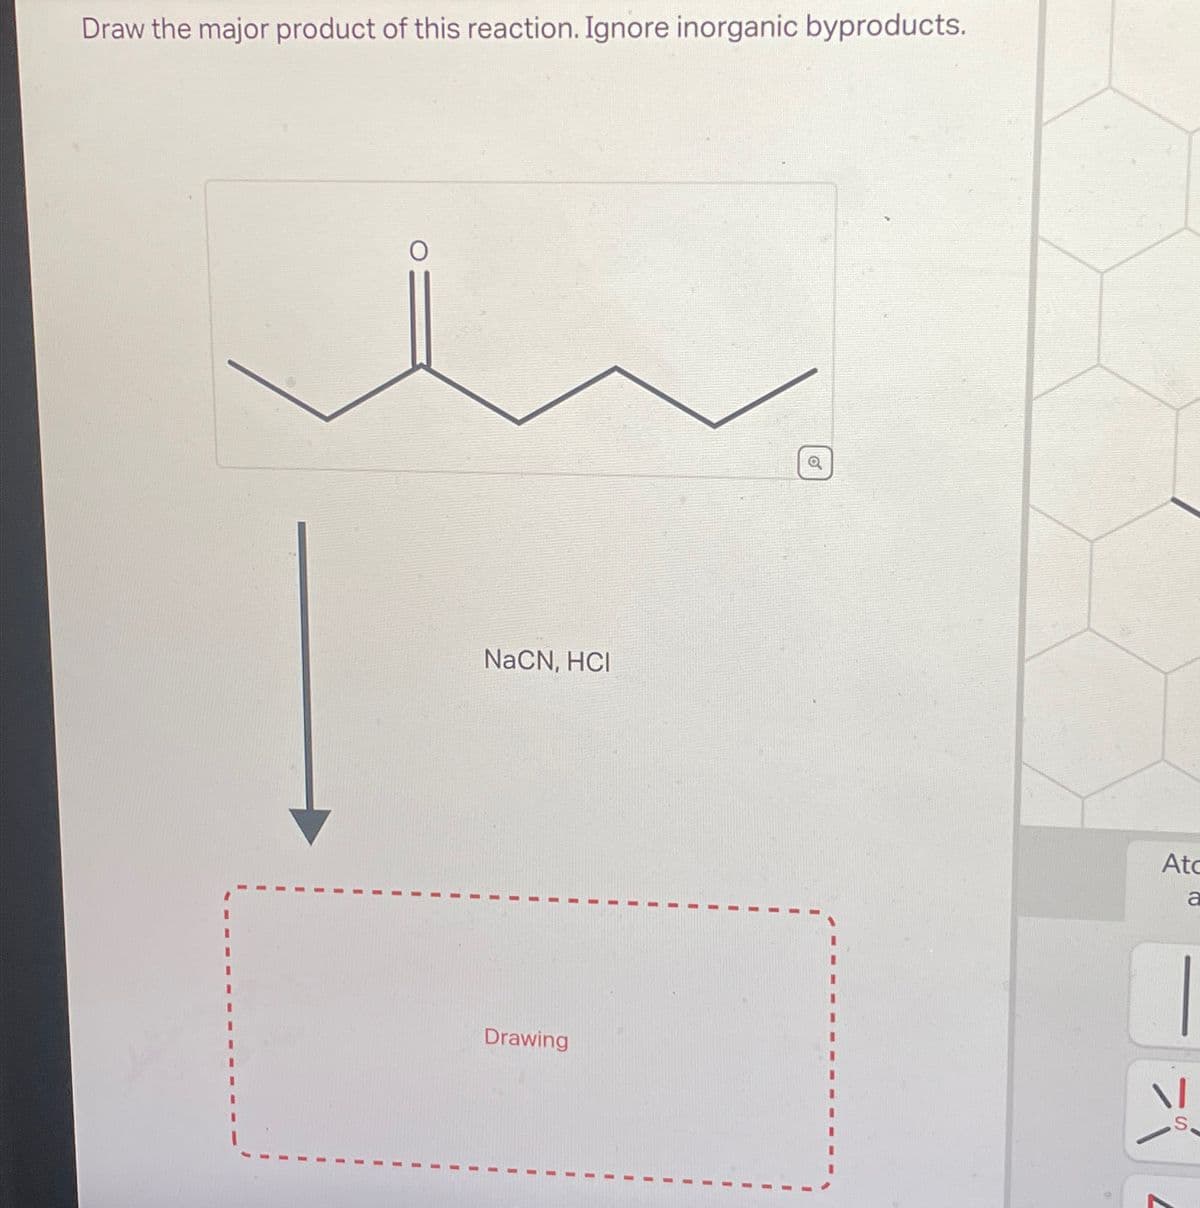 Draw the major product of this reaction. Ignore inorganic byproducts.
NaCN, HCI
Drawing
a
At
a
Δ